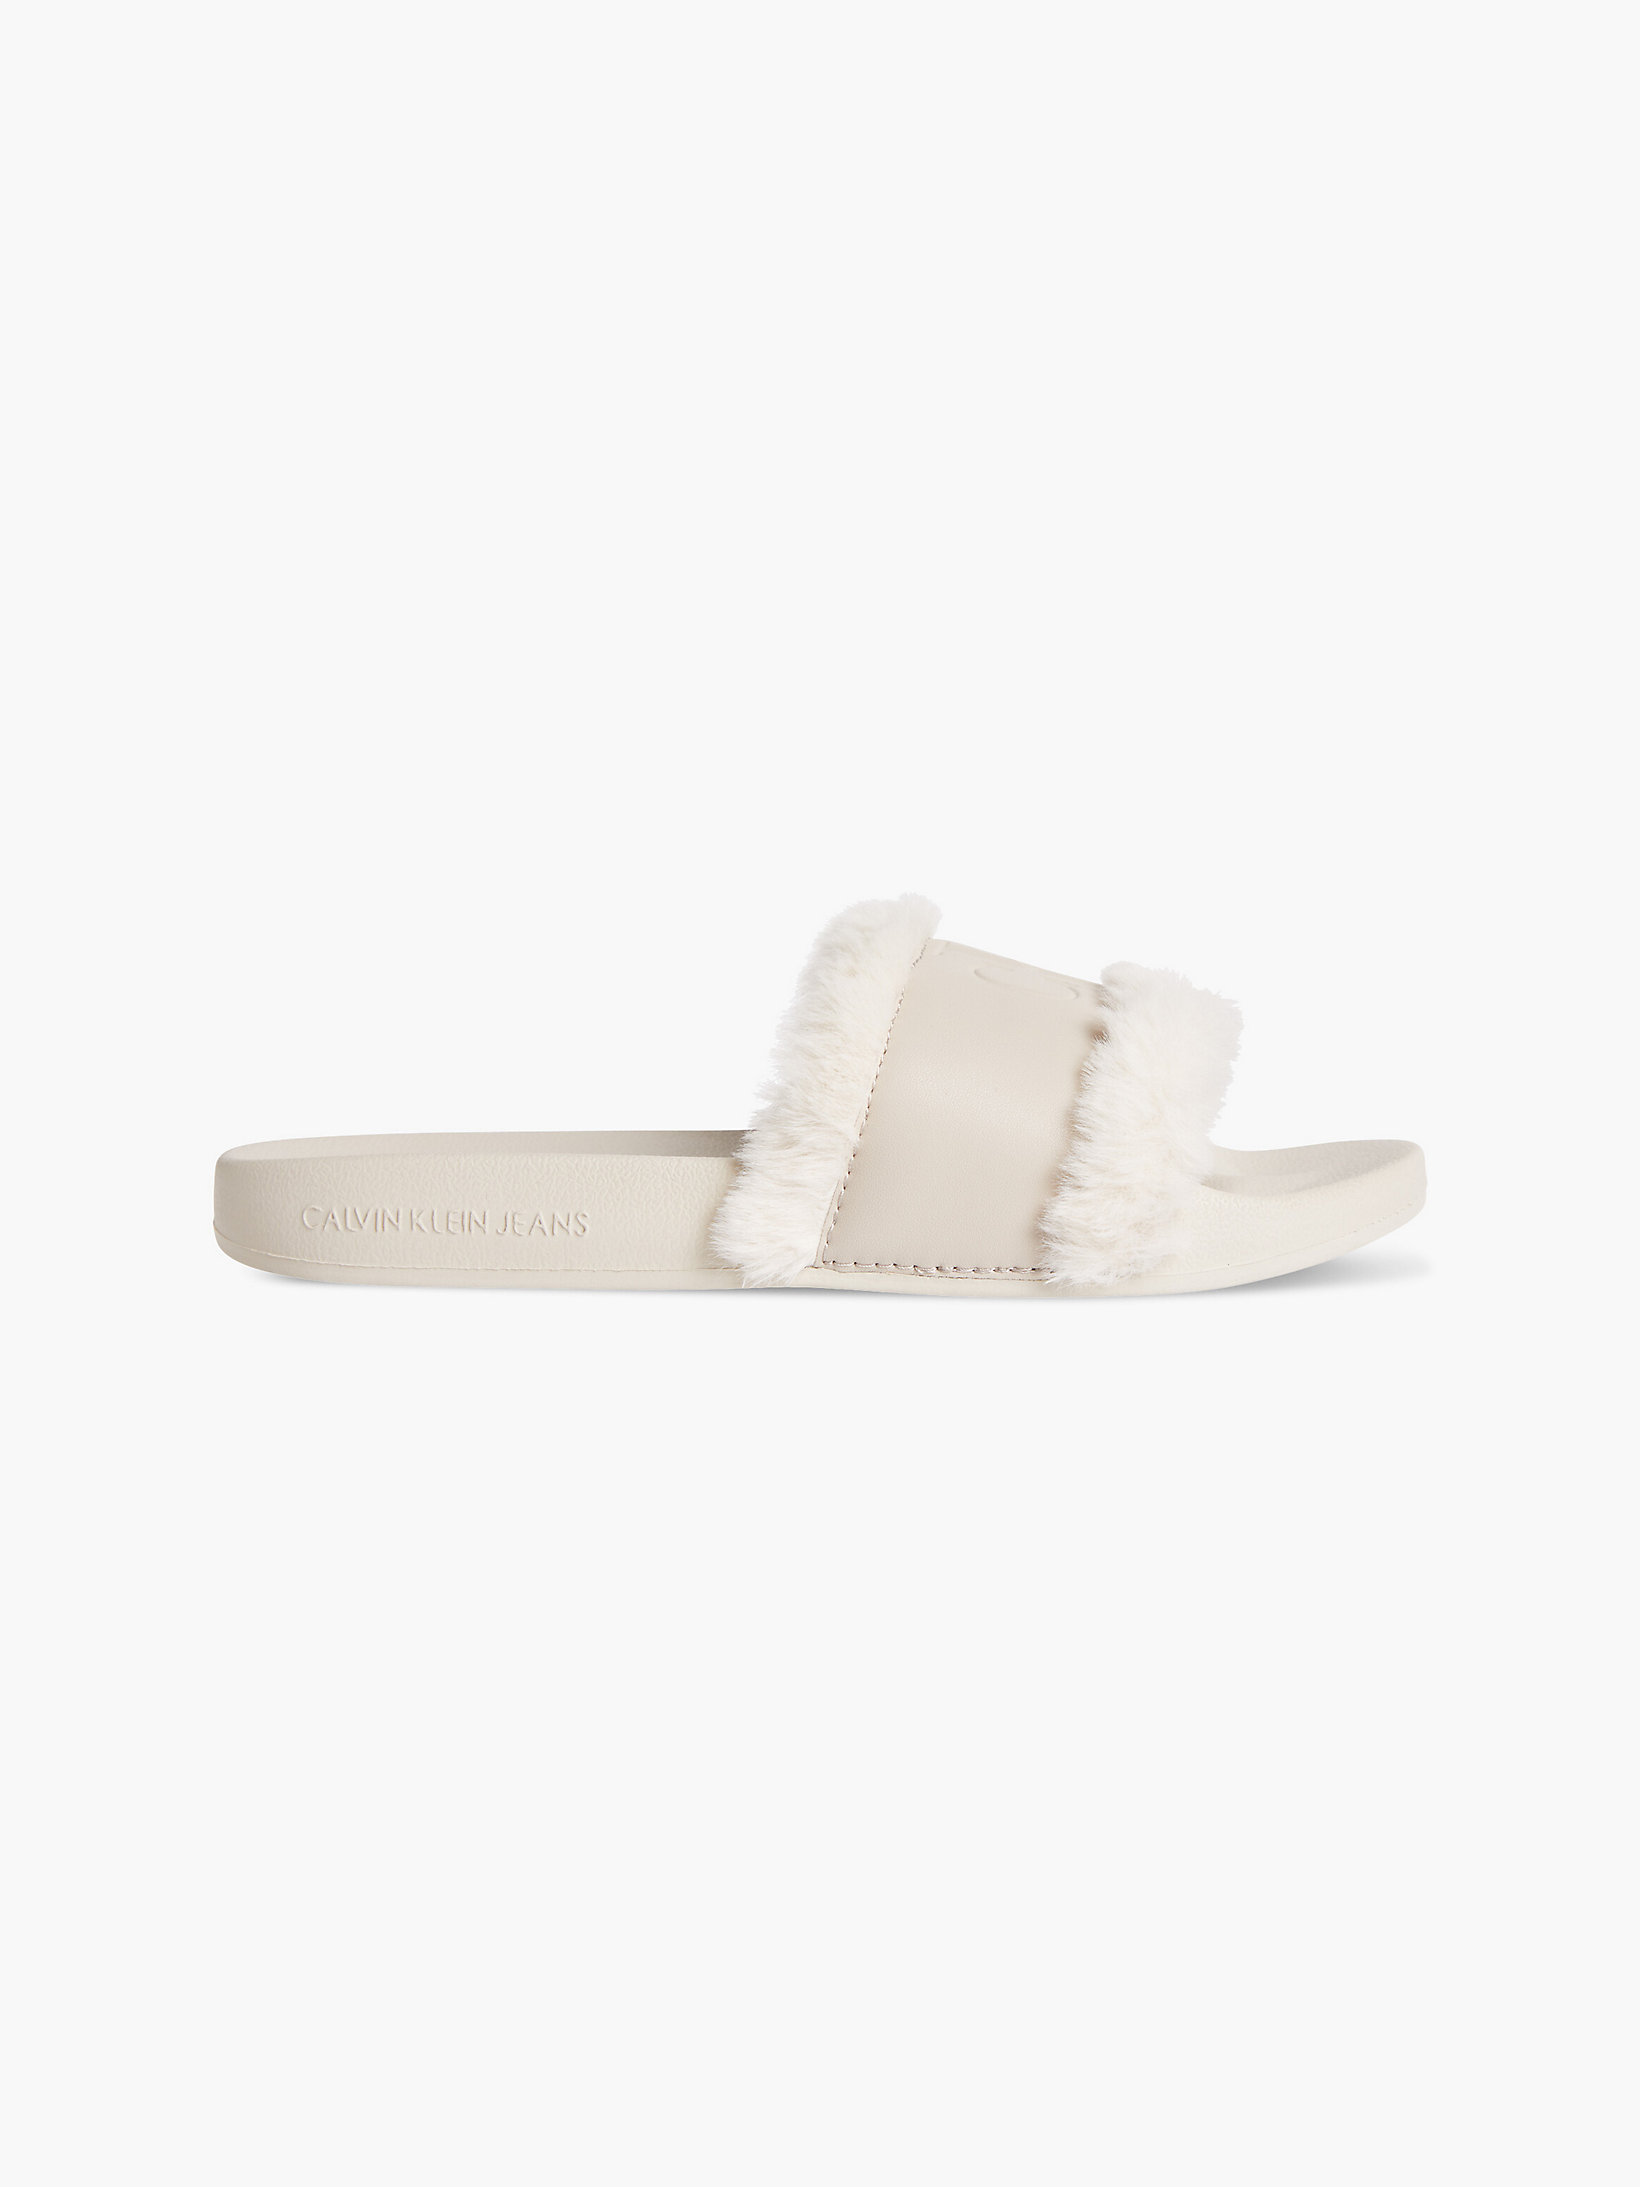 Eggshell Recycled Faux Fur Sliders undefined women Calvin Klein